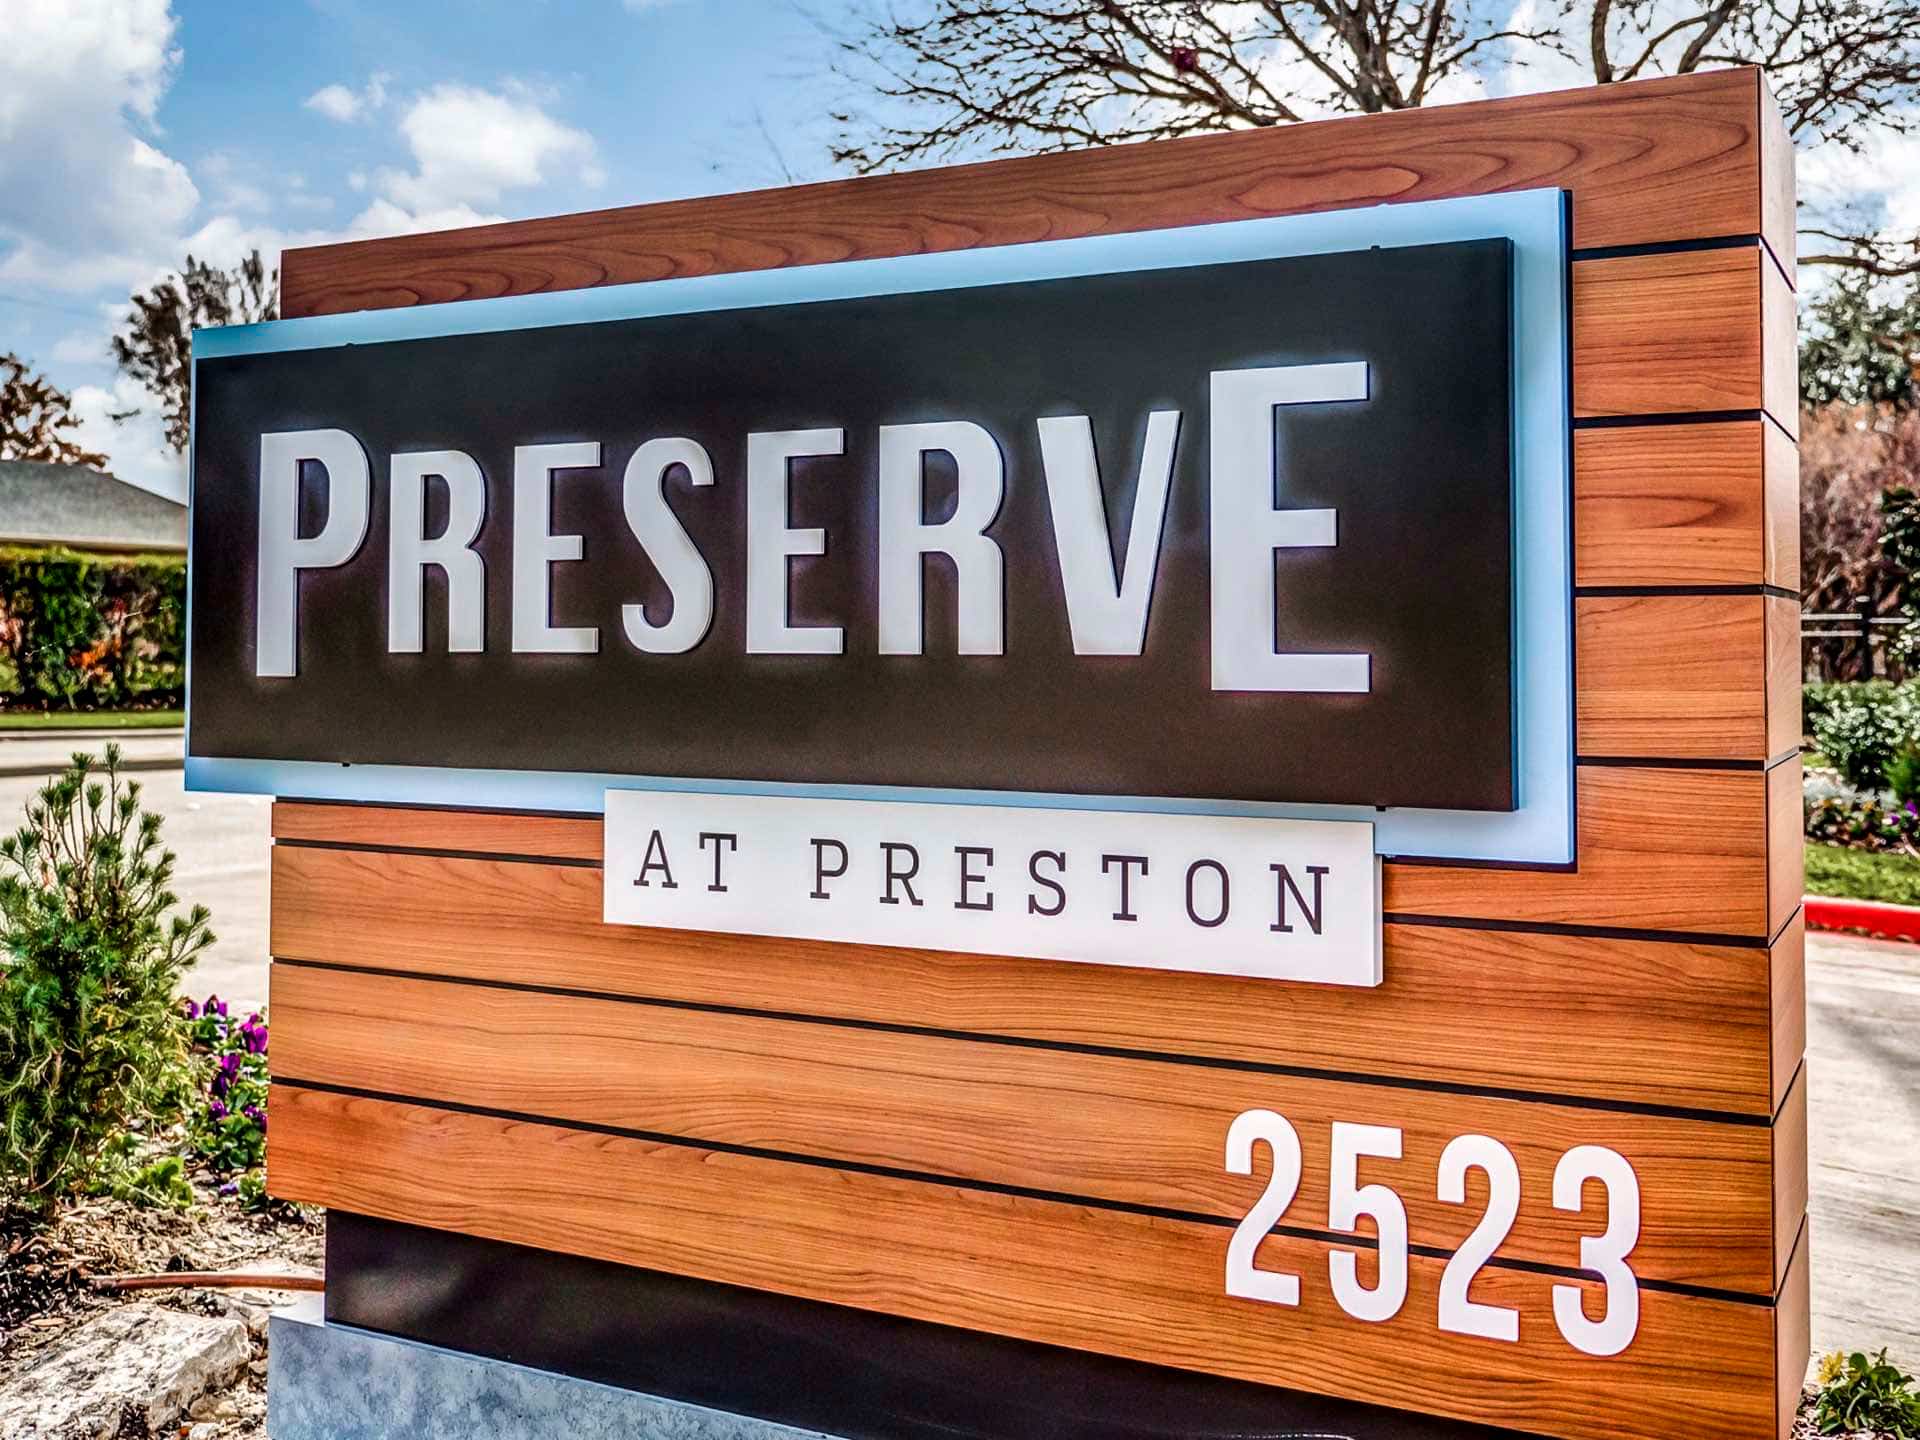 Preserve at Preson sign with street number 2523